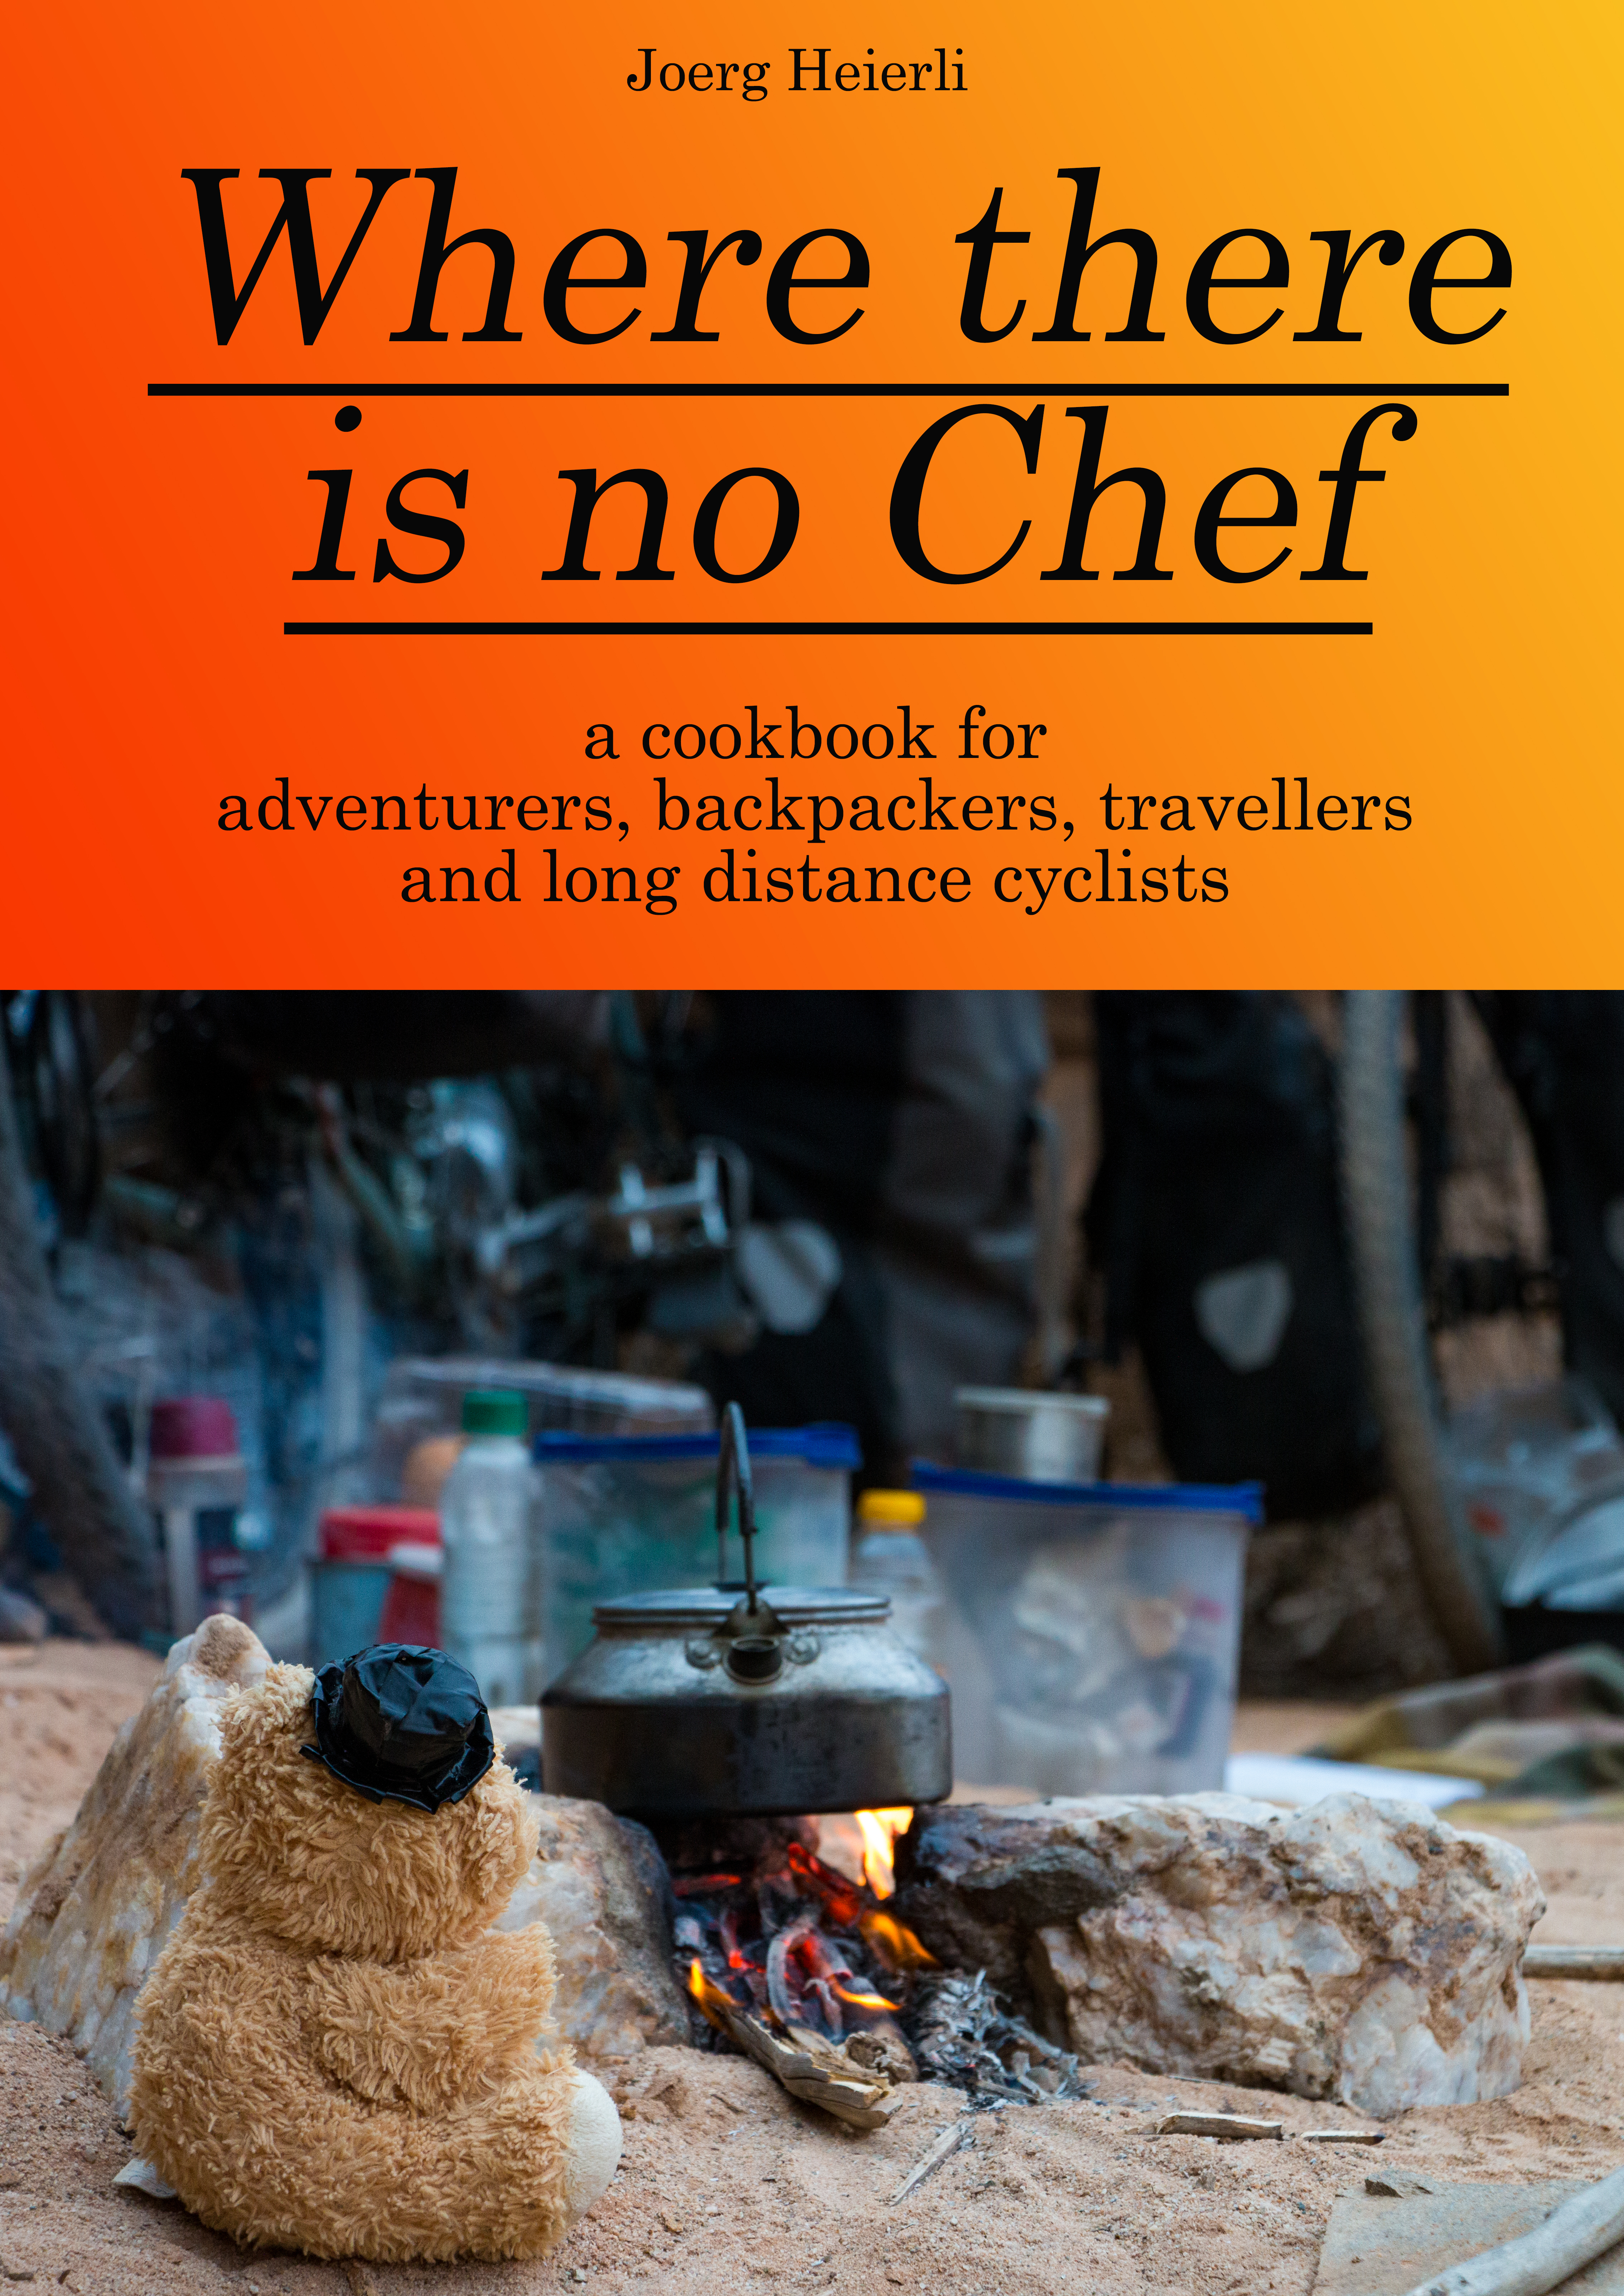 The cookbook "Where there is no chef"